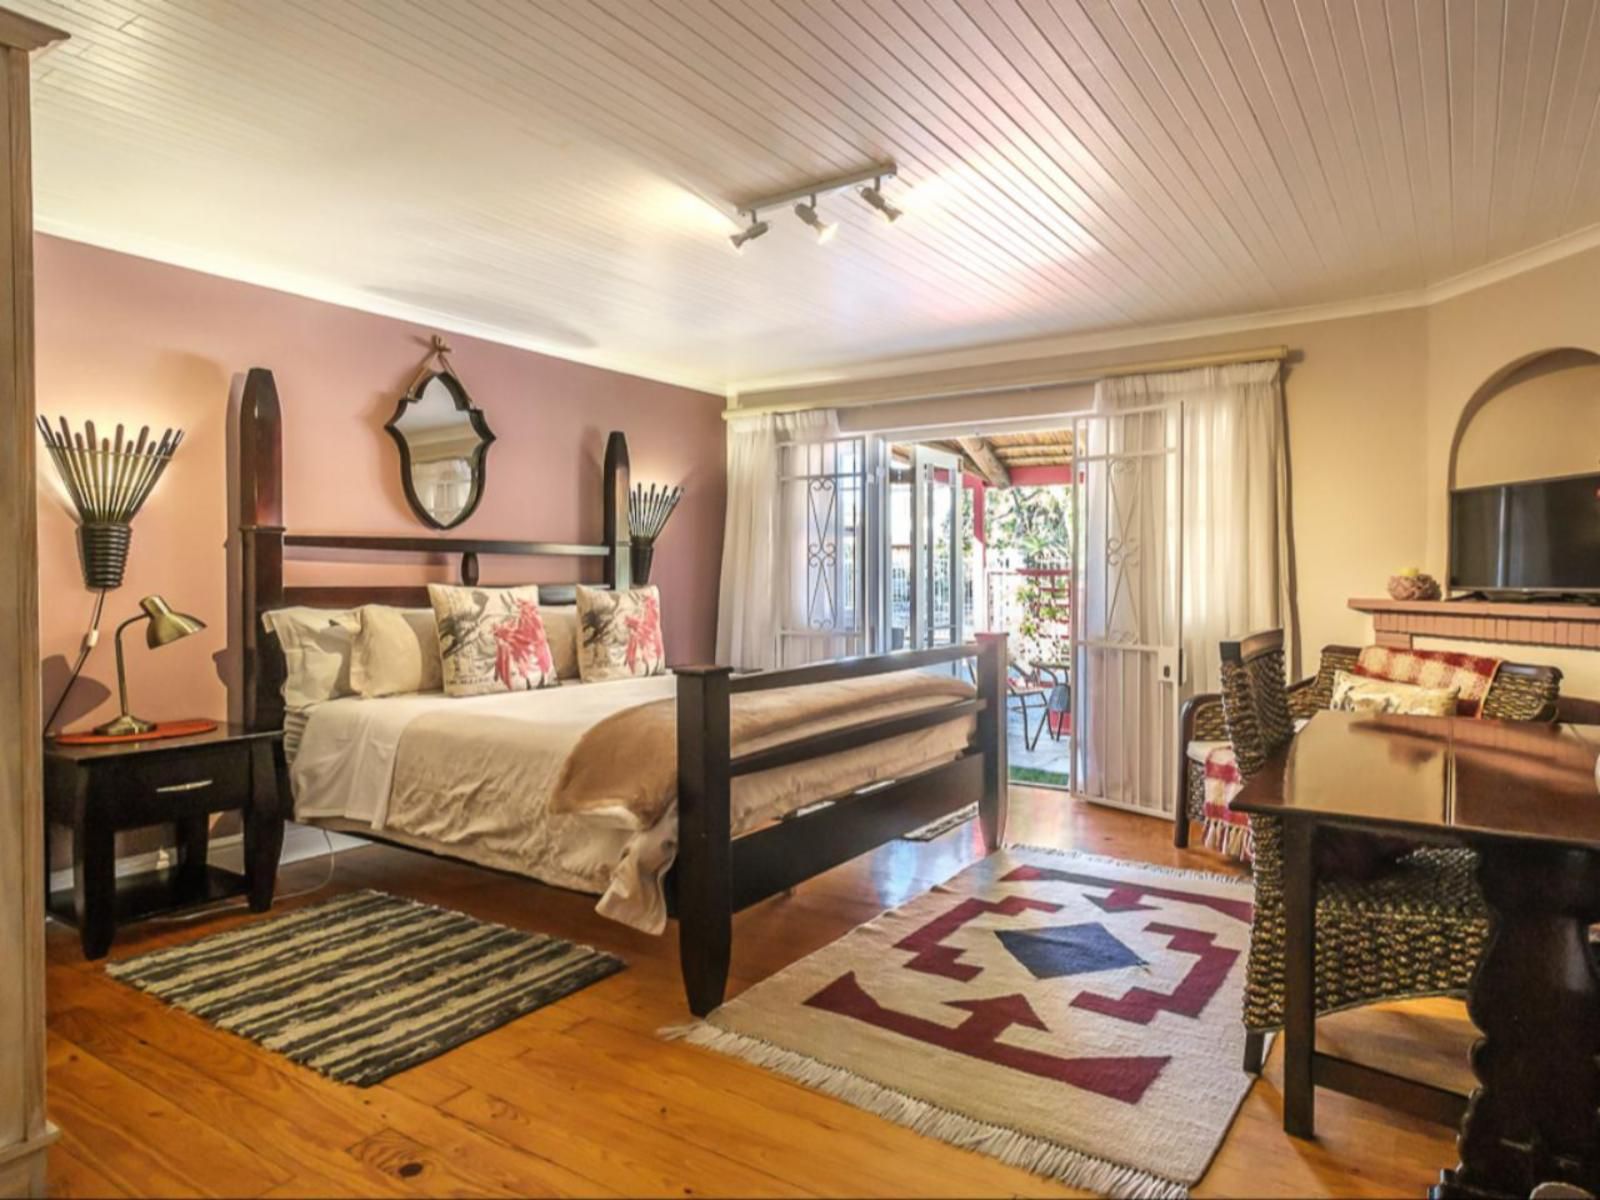 Inn Style Guest House Pinelands Cape Town Western Cape South Africa Bedroom